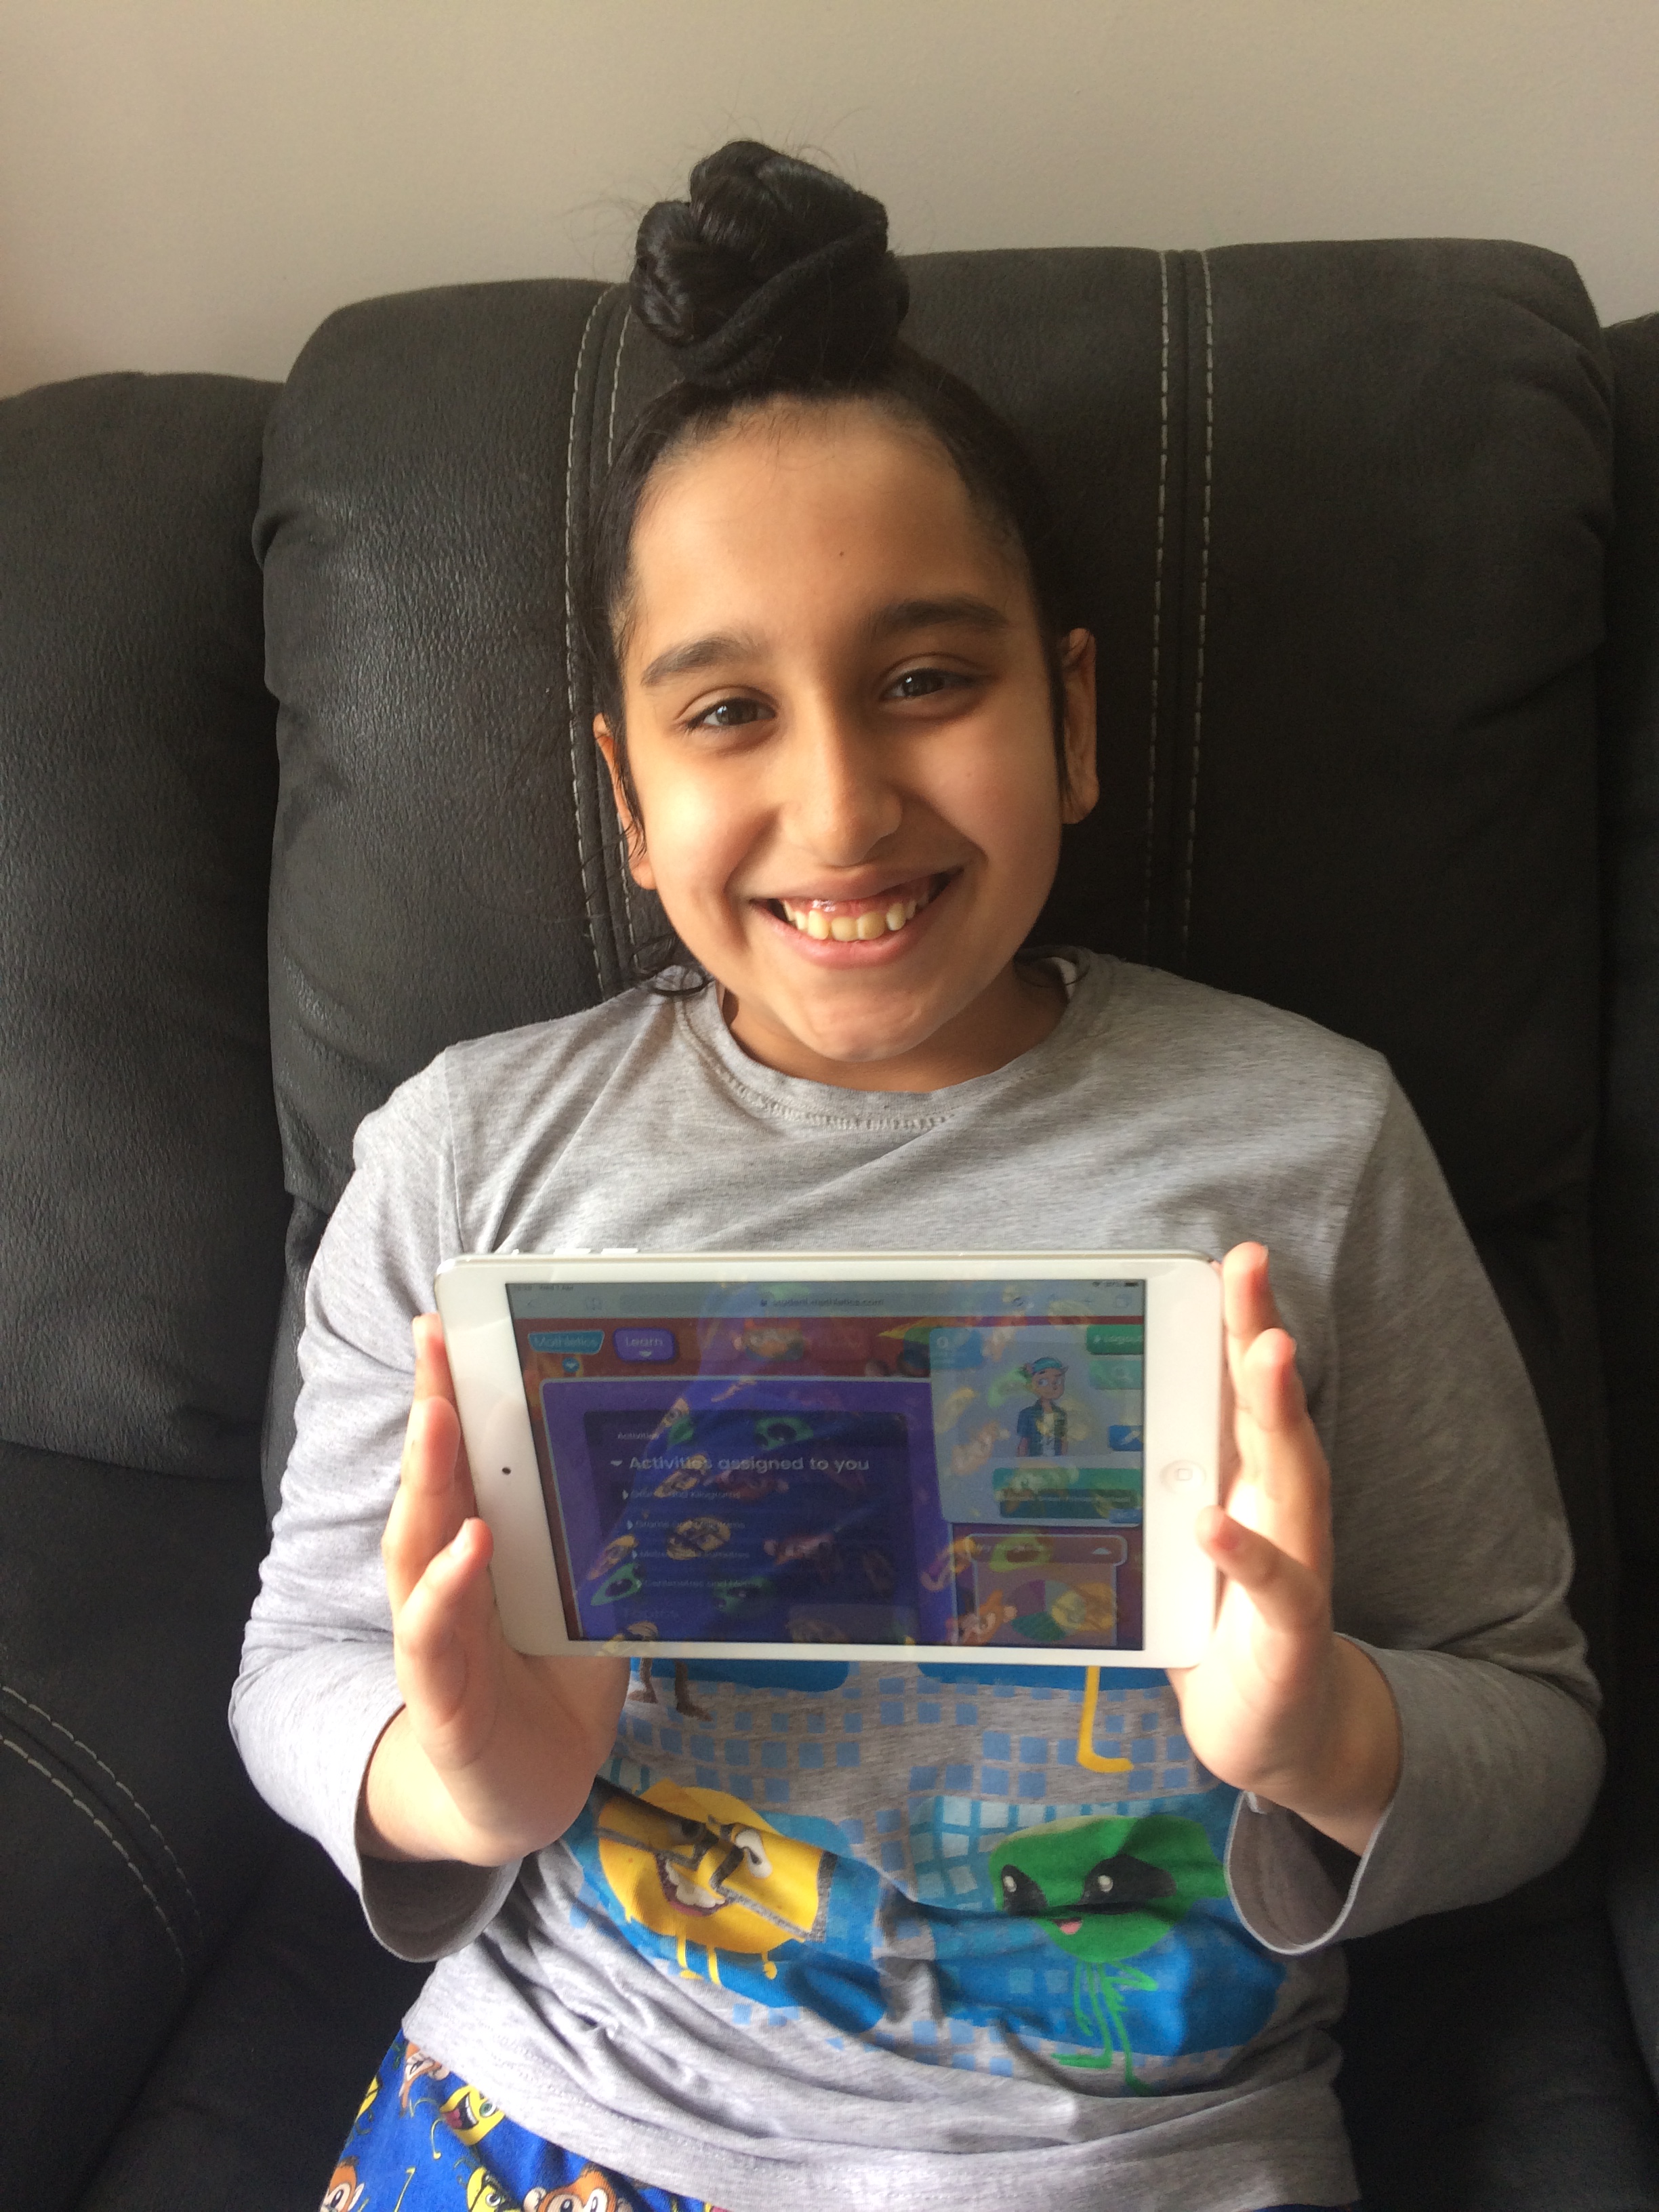 Well done, Harjas, for keeping up with your Mathletics ...